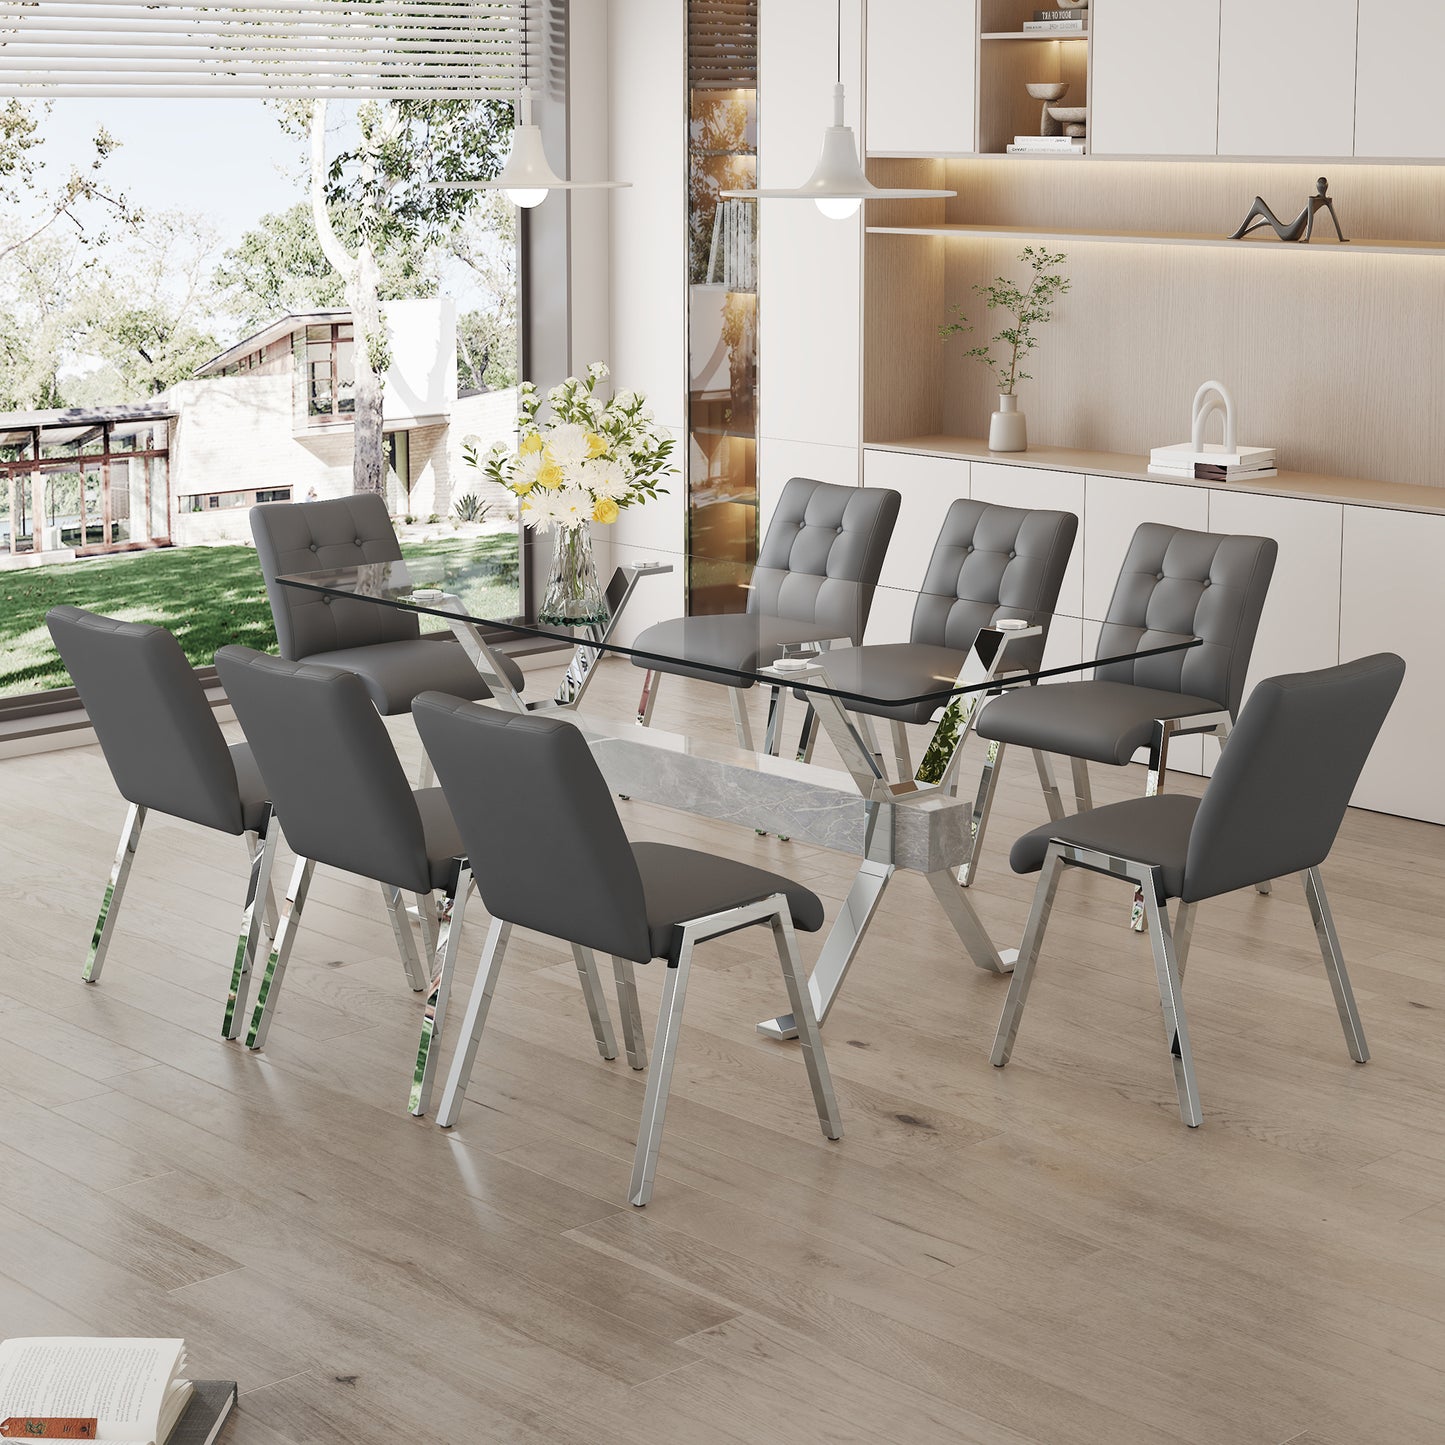 Nicolette 8-Piece Dining Table (gray chairs)